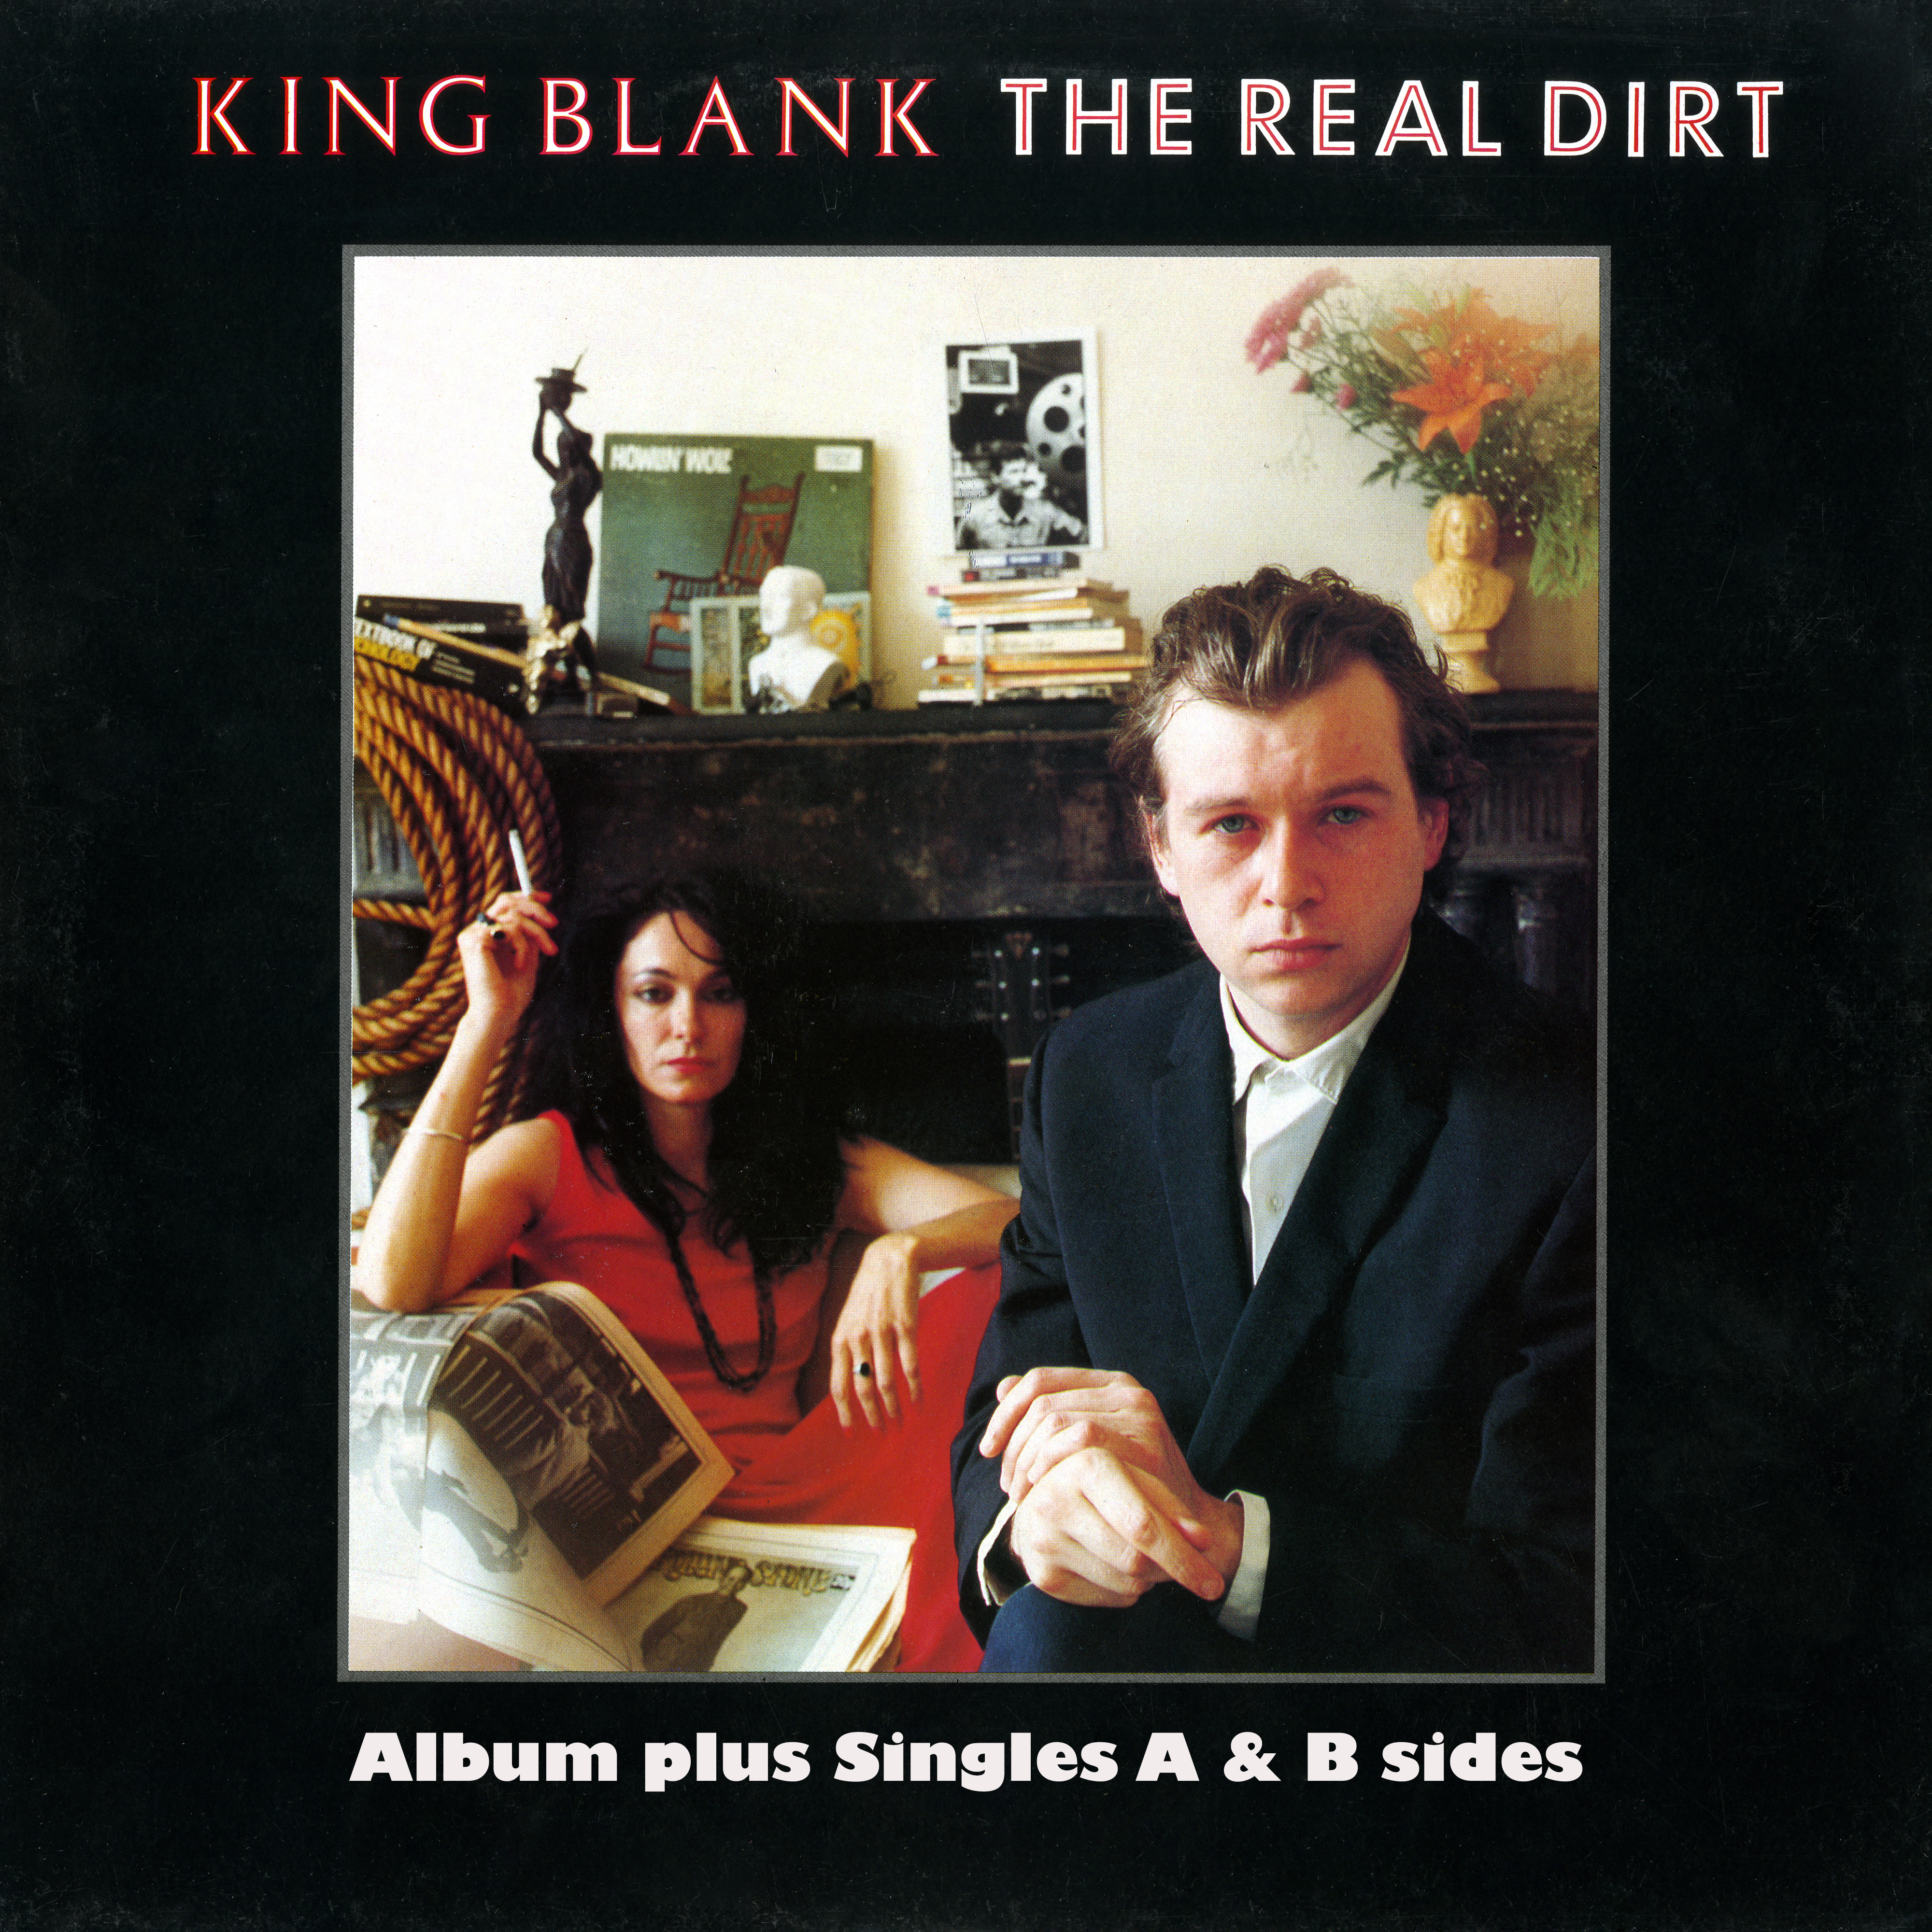 The Real Dirt Album + Singles A & B sides